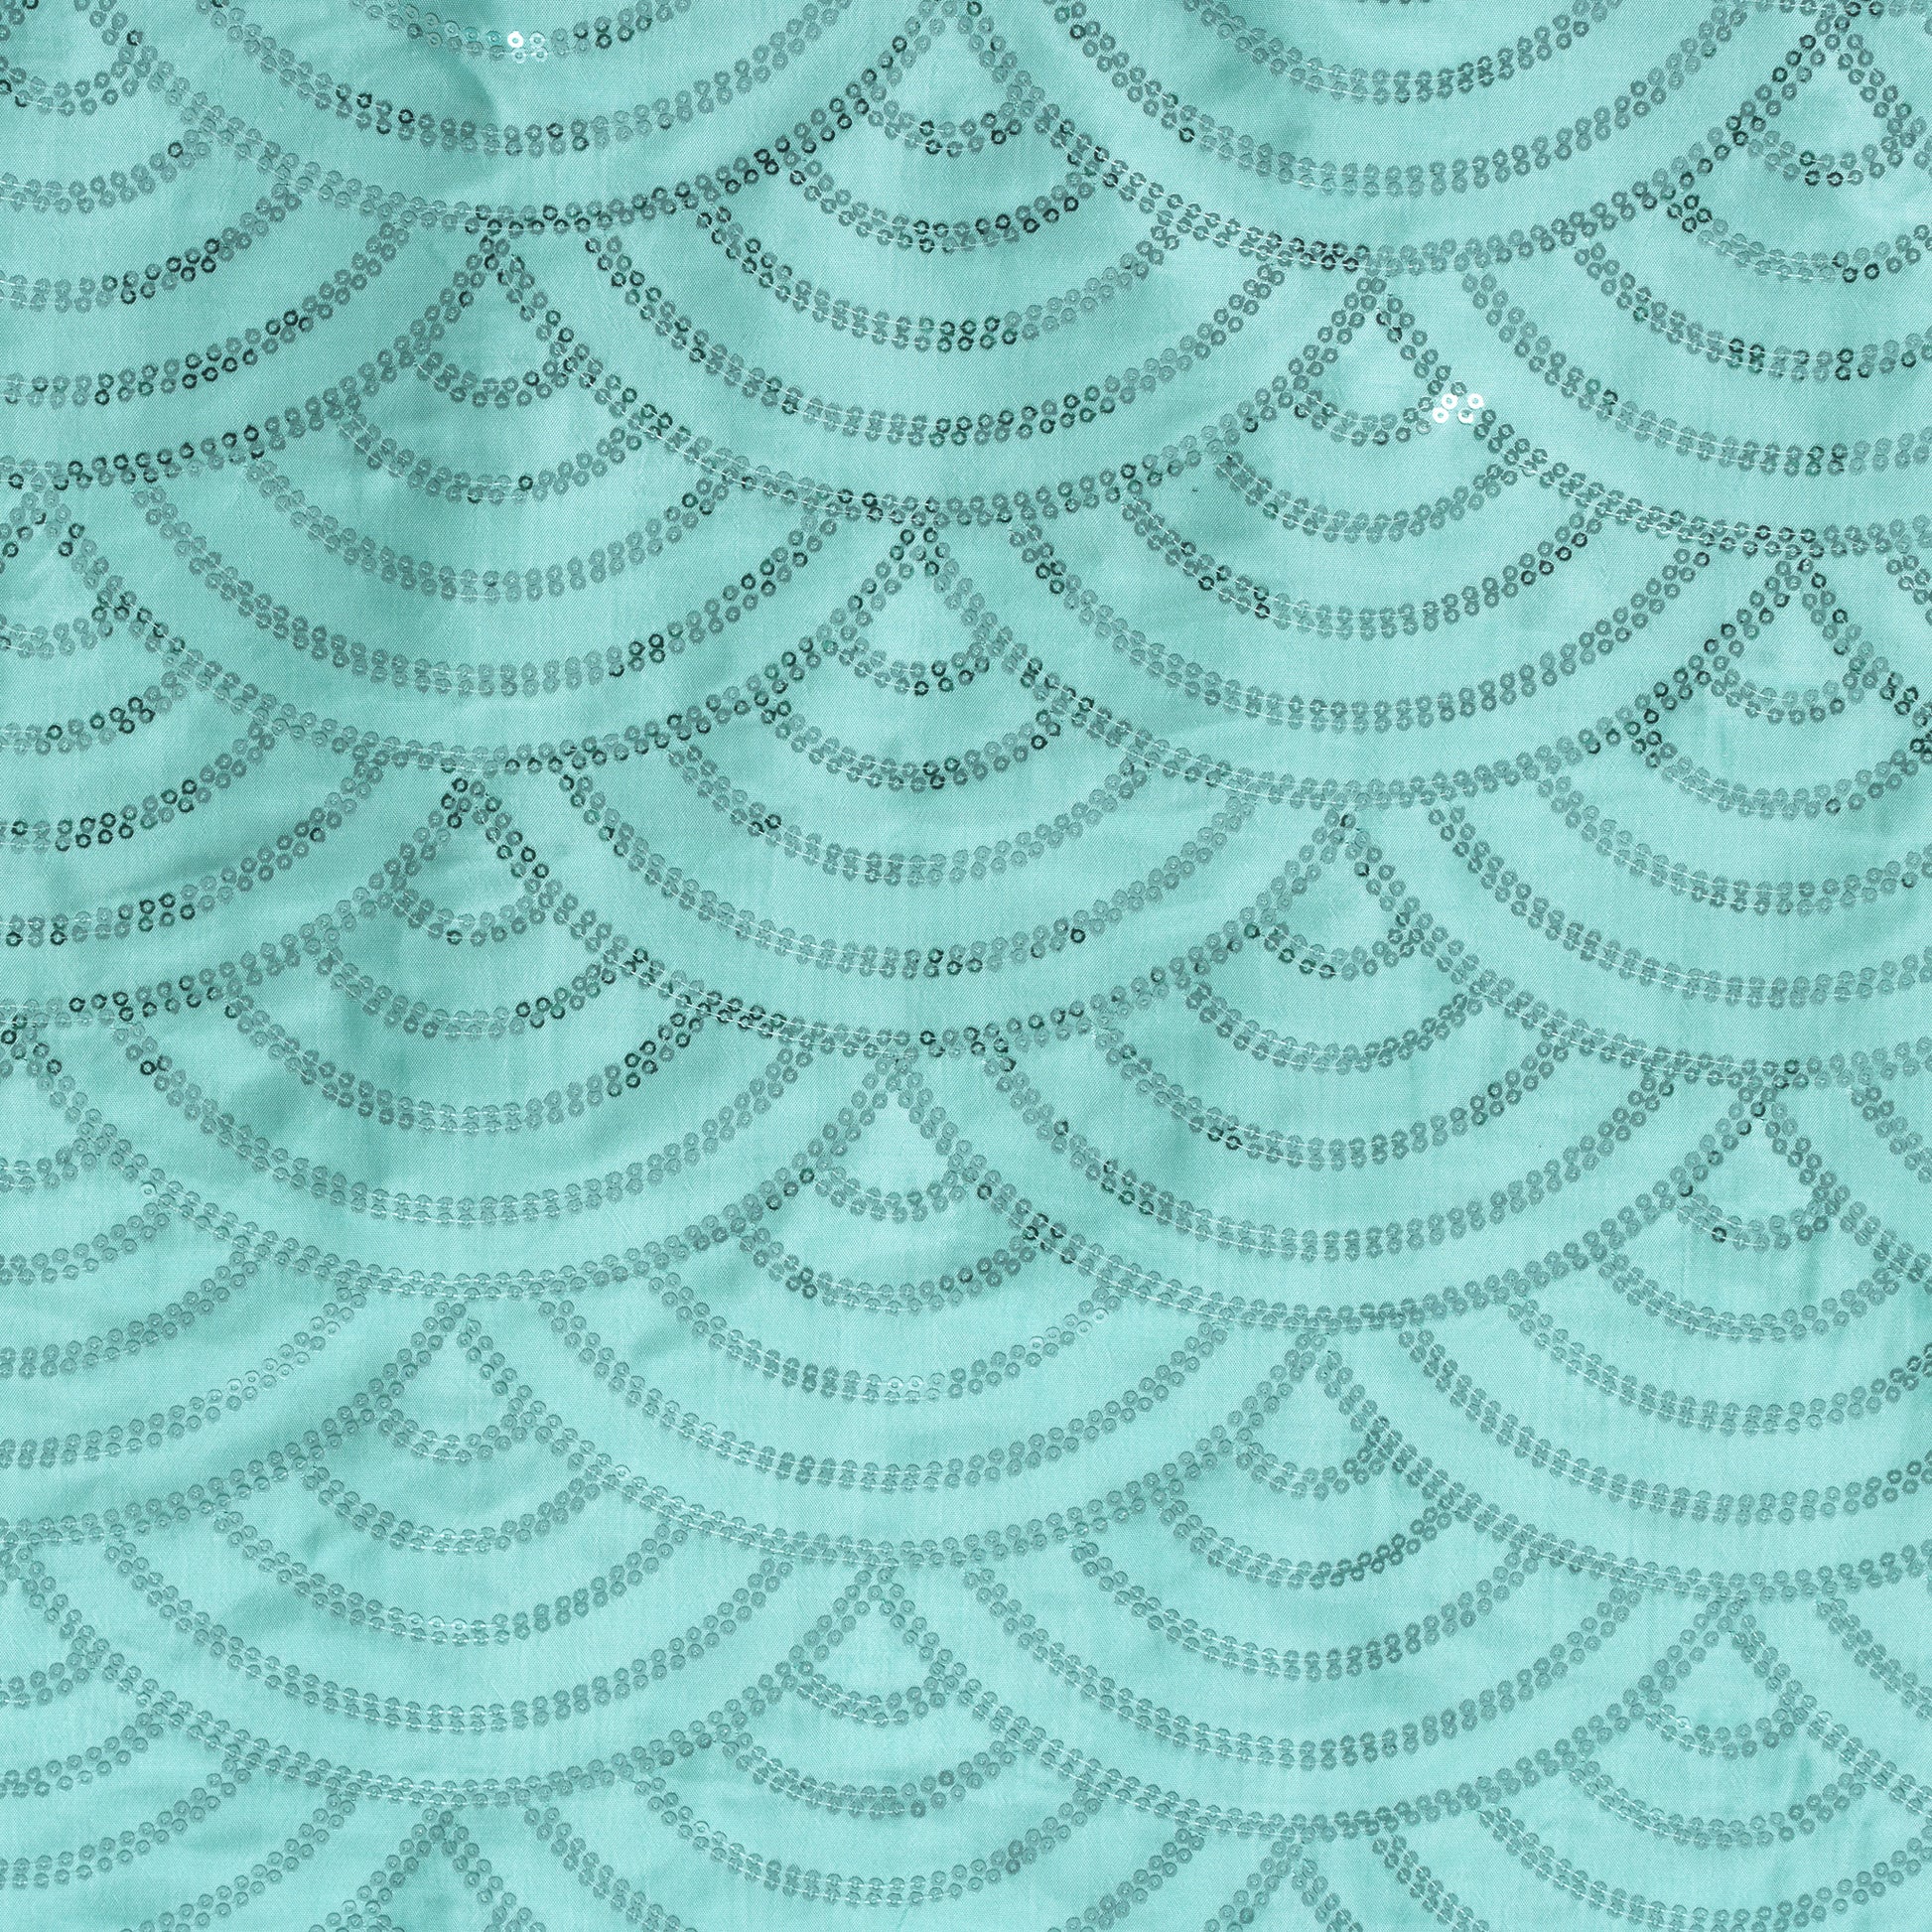 Mermaid Scale Sequin Fabric Roll 10 yards - Turquoise